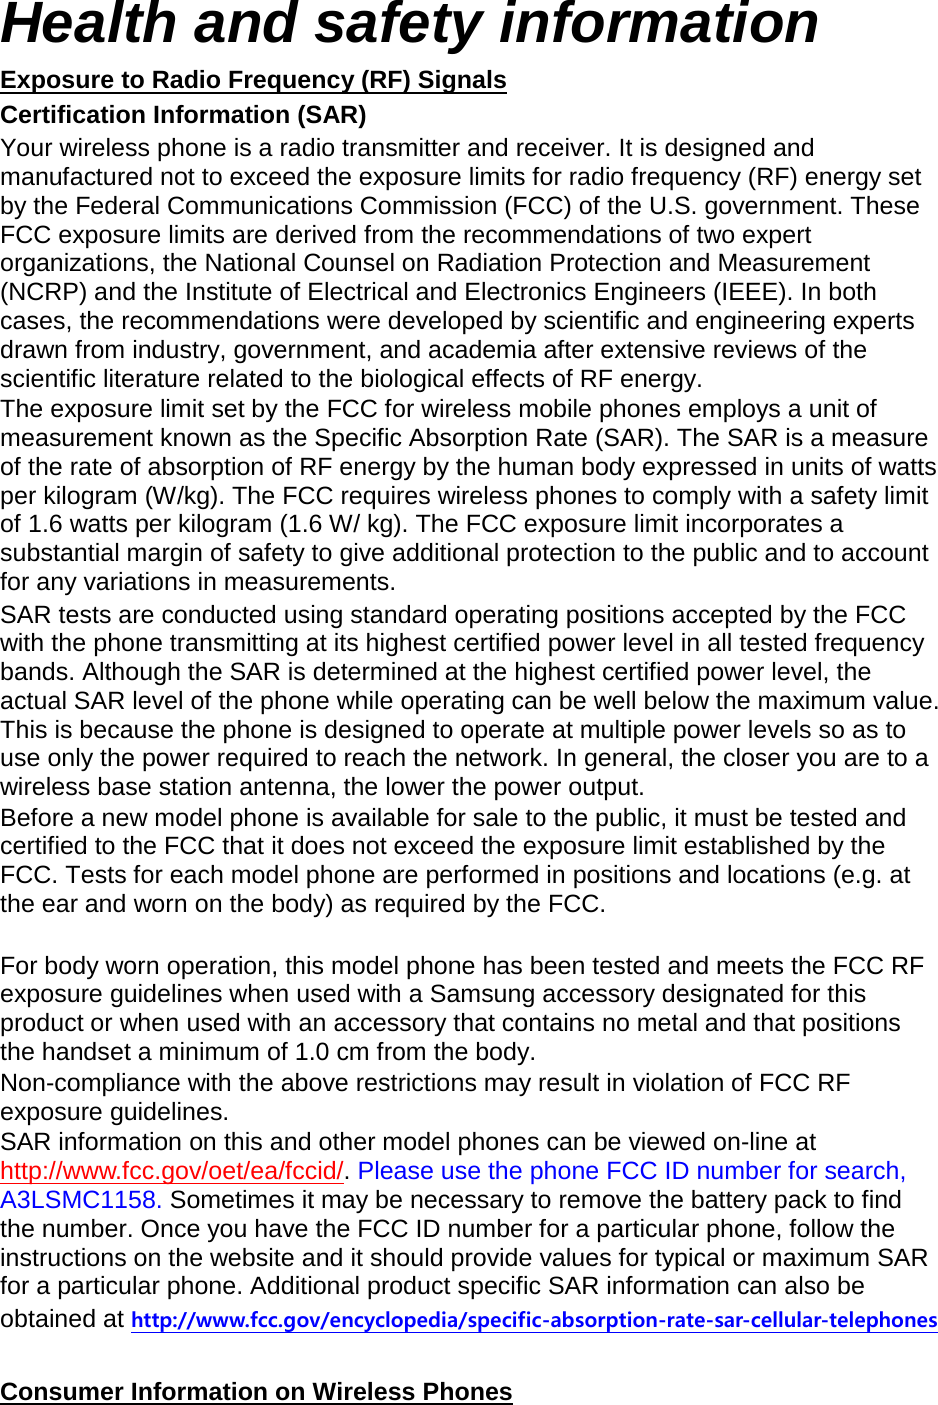 Health and safety information Exposure to Radio Frequency (RF) Signals Certification Information (SAR) Your wireless phone is a radio transmitter and receiver. It is designed and manufactured not to exceed the exposure limits for radio frequency (RF) energy set by the Federal Communications Commission (FCC) of the U.S. government. These FCC exposure limits are derived from the recommendations of two expert organizations, the National Counsel on Radiation Protection and Measurement (NCRP) and the Institute of Electrical and Electronics Engineers (IEEE). In both cases, the recommendations were developed by scientific and engineering experts drawn from industry, government, and academia after extensive reviews of the scientific literature related to the biological effects of RF energy. The exposure limit set by the FCC for wireless mobile phones employs a unit of measurement known as the Specific Absorption Rate (SAR). The SAR is a measure of the rate of absorption of RF energy by the human body expressed in units of watts per kilogram (W/kg). The FCC requires wireless phones to comply with a safety limit of 1.6 watts per kilogram (1.6 W/ kg). The FCC exposure limit incorporates a substantial margin of safety to give additional protection to the public and to account for any variations in measurements. SAR tests are conducted using standard operating positions accepted by the FCC with the phone transmitting at its highest certified power level in all tested frequency bands. Although the SAR is determined at the highest certified power level, the actual SAR level of the phone while operating can be well below the maximum value. This is because the phone is designed to operate at multiple power levels so as to use only the power required to reach the network. In general, the closer you are to a wireless base station antenna, the lower the power output. Before a new model phone is available for sale to the public, it must be tested and certified to the FCC that it does not exceed the exposure limit established by the FCC. Tests for each model phone are performed in positions and locations (e.g. at the ear and worn on the body) as required by the FCC.      For body worn operation, this model phone has been tested and meets the FCC RF exposure guidelines when used with a Samsung accessory designated for this product or when used with an accessory that contains no metal and that positions the handset a minimum of 1.0 cm from the body.   Non-compliance with the above restrictions may result in violation of FCC RF exposure guidelines. SAR information on this and other model phones can be viewed on-line at http://www.fcc.gov/oet/ea/fccid/. Please use the phone FCC ID number for search, A3LSMC1158. Sometimes it may be necessary to remove the battery pack to find the number. Once you have the FCC ID number for a particular phone, follow the instructions on the website and it should provide values for typical or maximum SAR for a particular phone. Additional product specific SAR information can also be obtained at http://www.fcc.gov/encyclopedia/specific-absorption-rate-sar-cellular-telephones  Consumer Information on Wireless Phones 